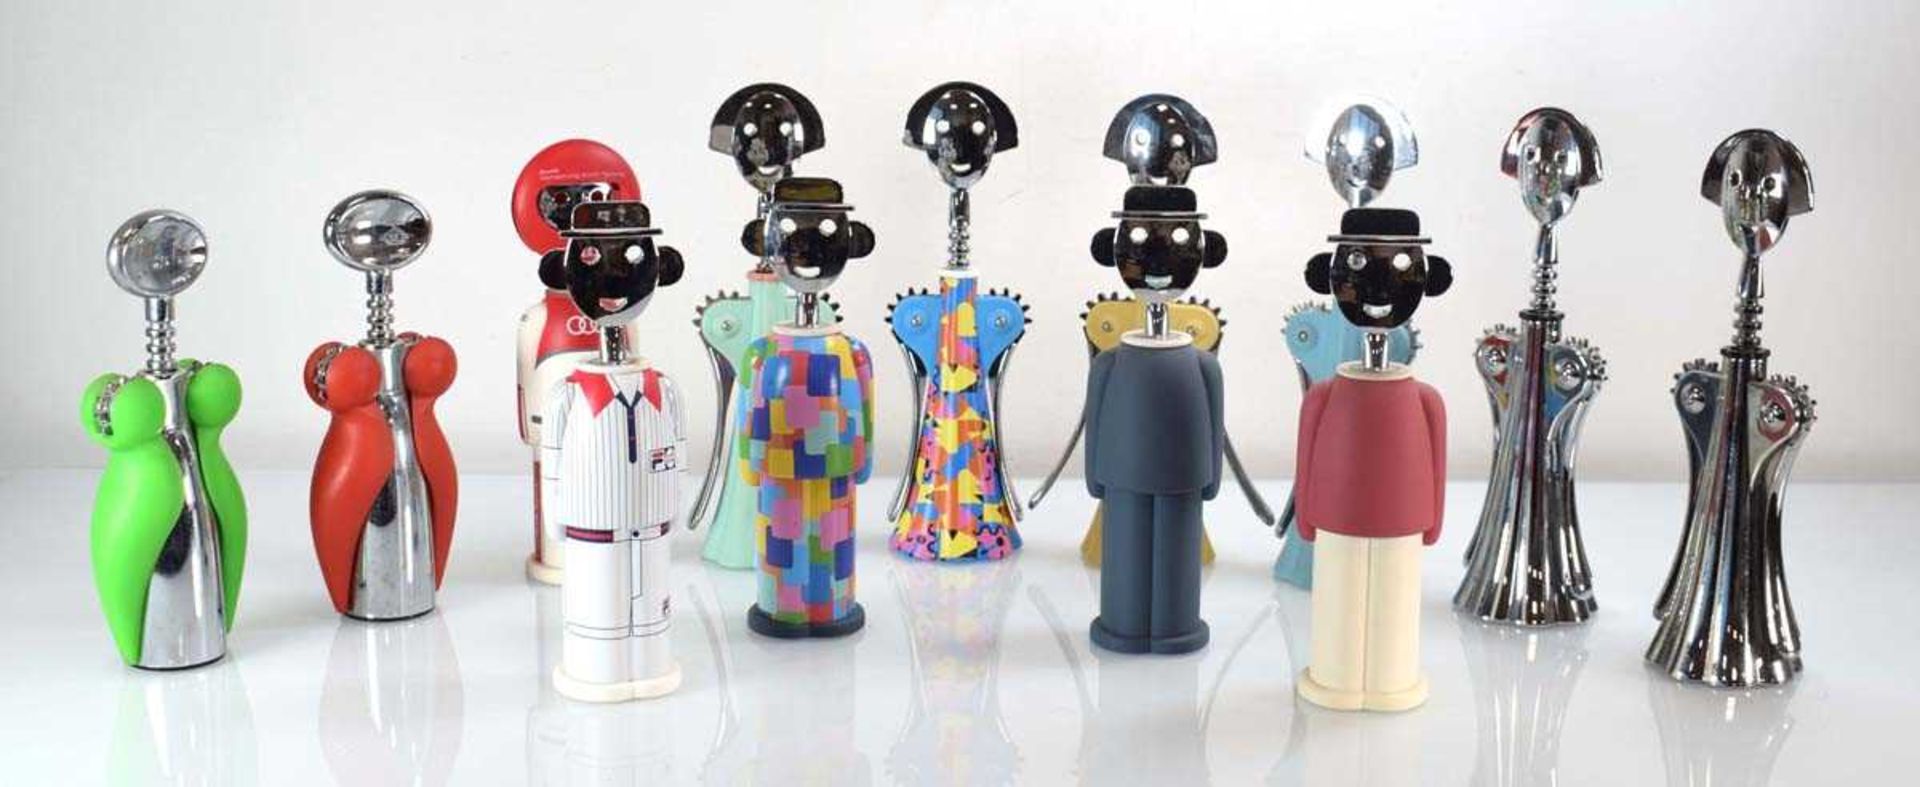 Alessandro Mendini for Alessi, a group of 'Anna G' and 'Sandro' corkscrews/bottle openers together